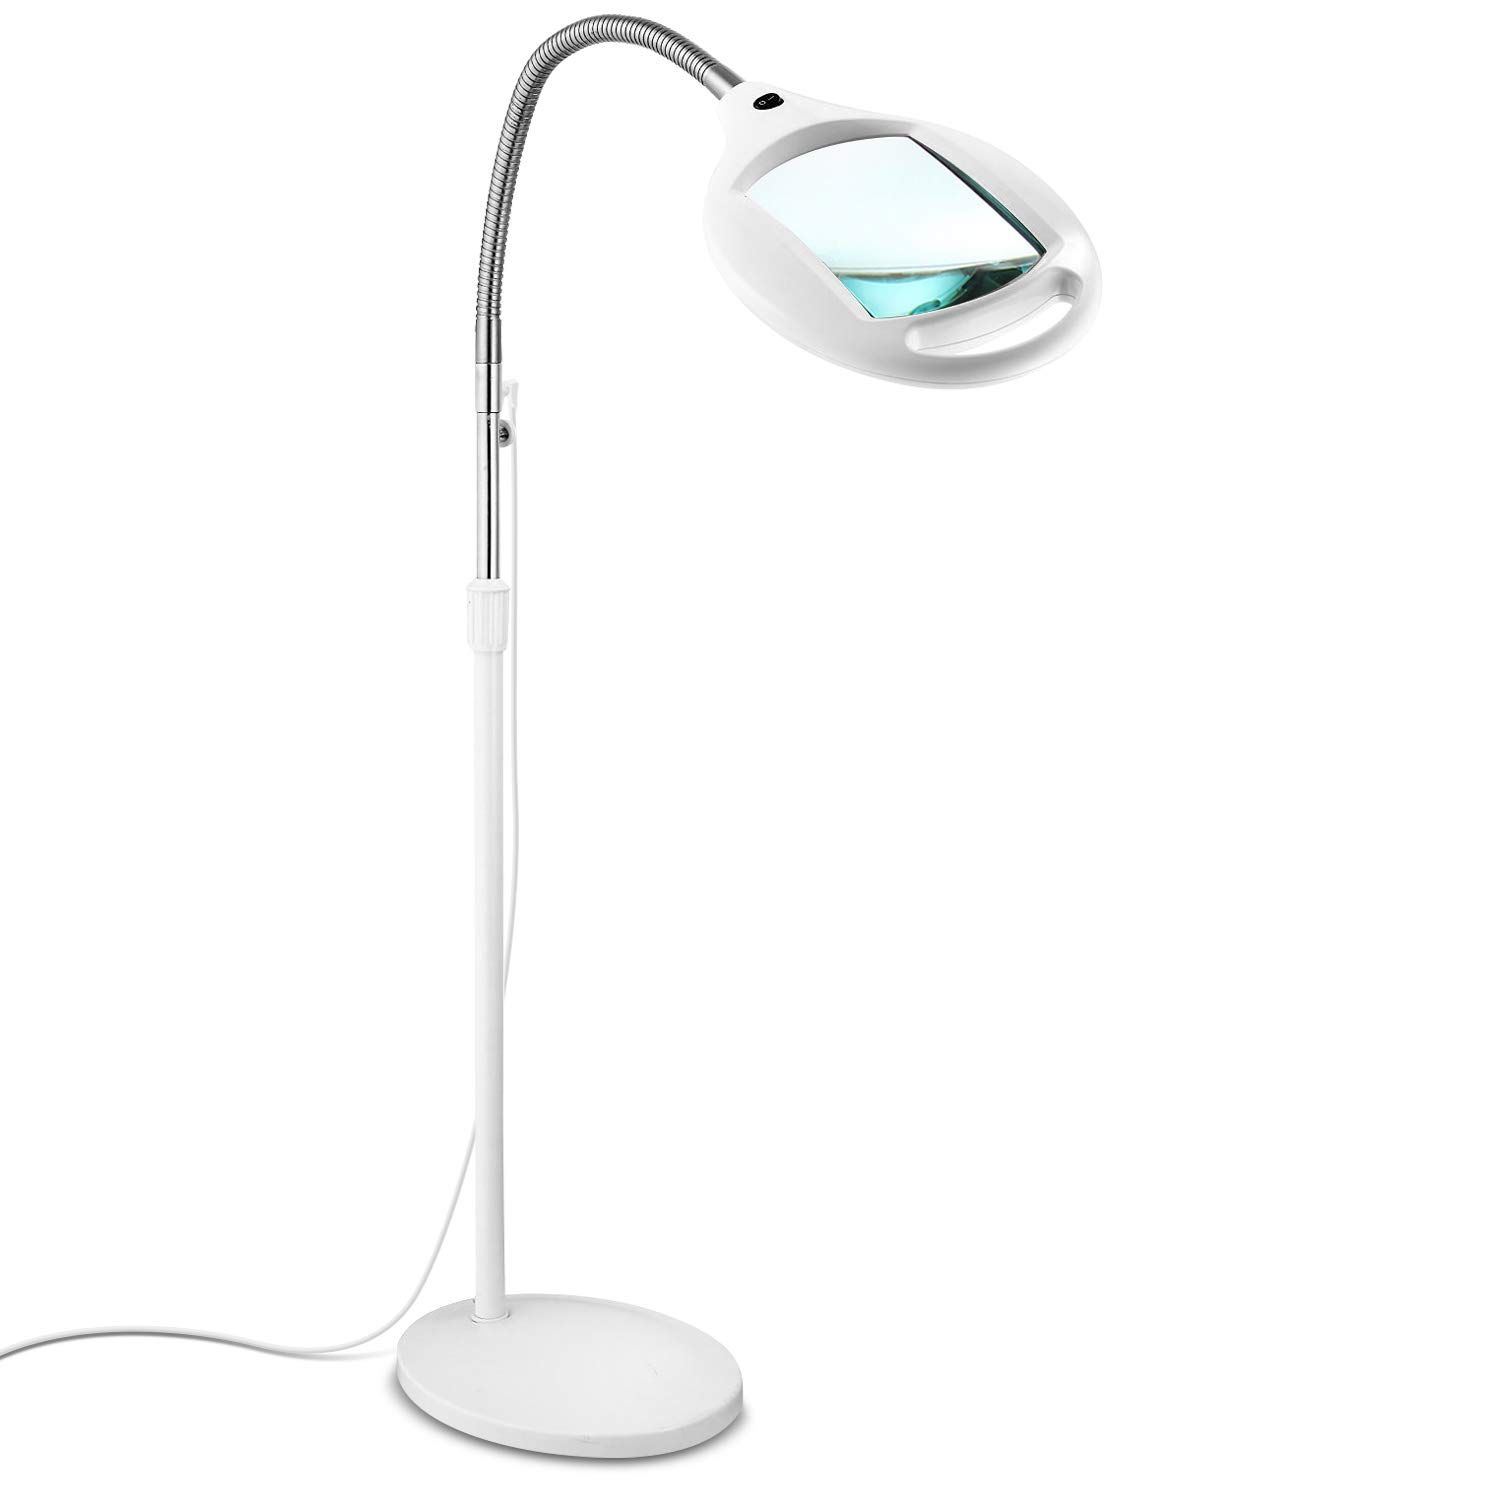 Brightech Lightview Pro Led Magnifying Floor Lamp Daylight pertaining to size 1500 X 1500